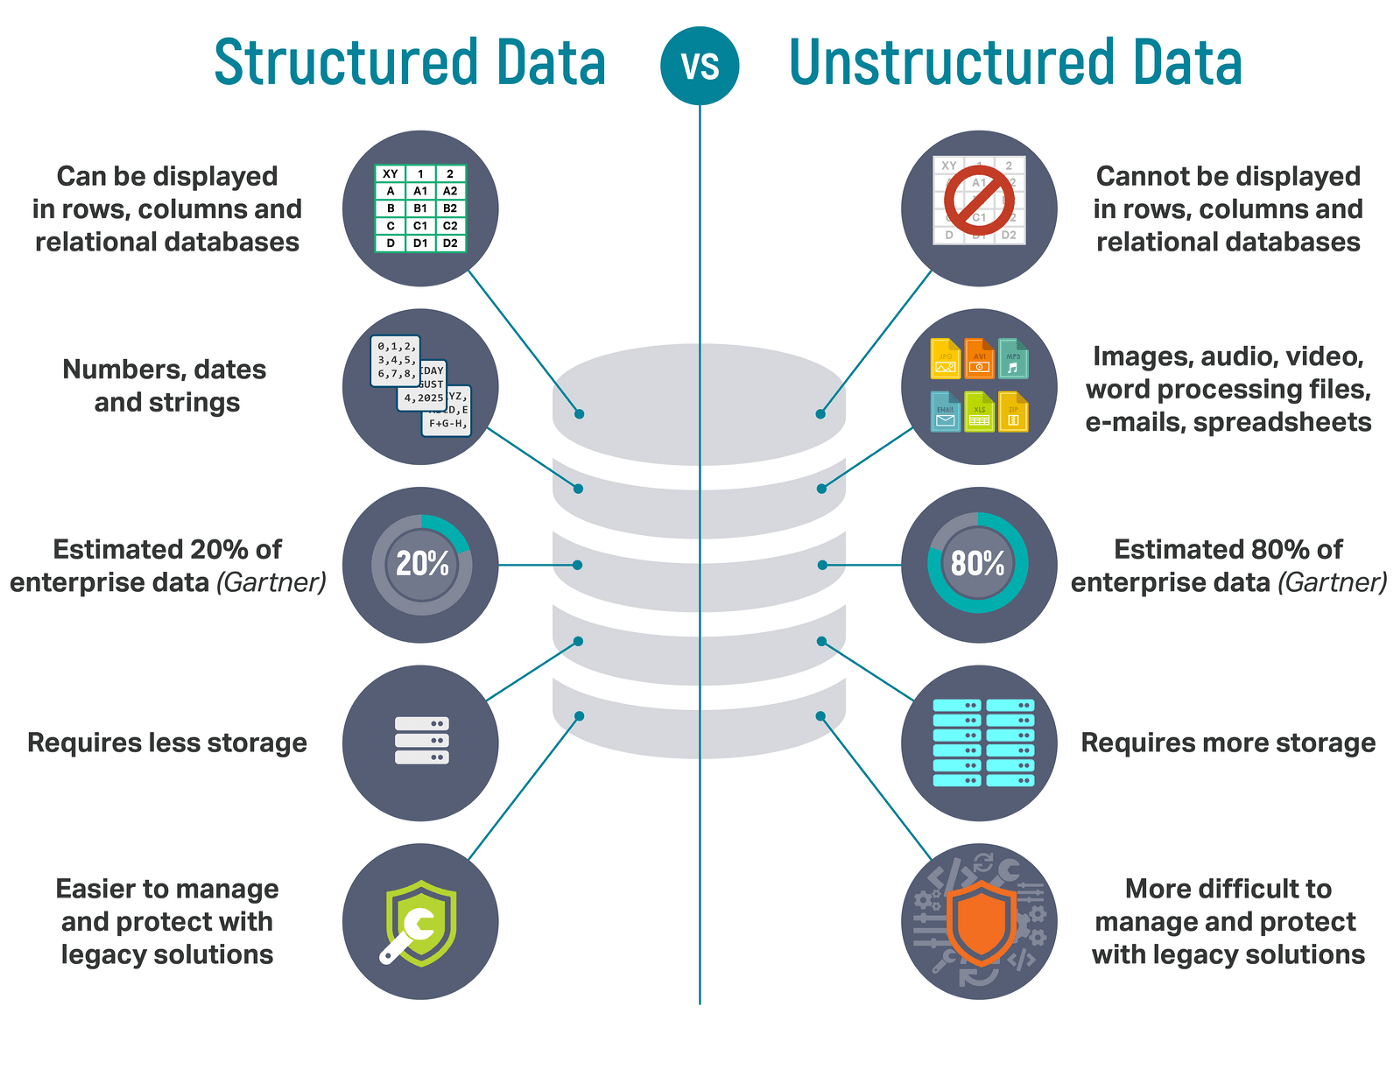 Structured vs Unstructured data